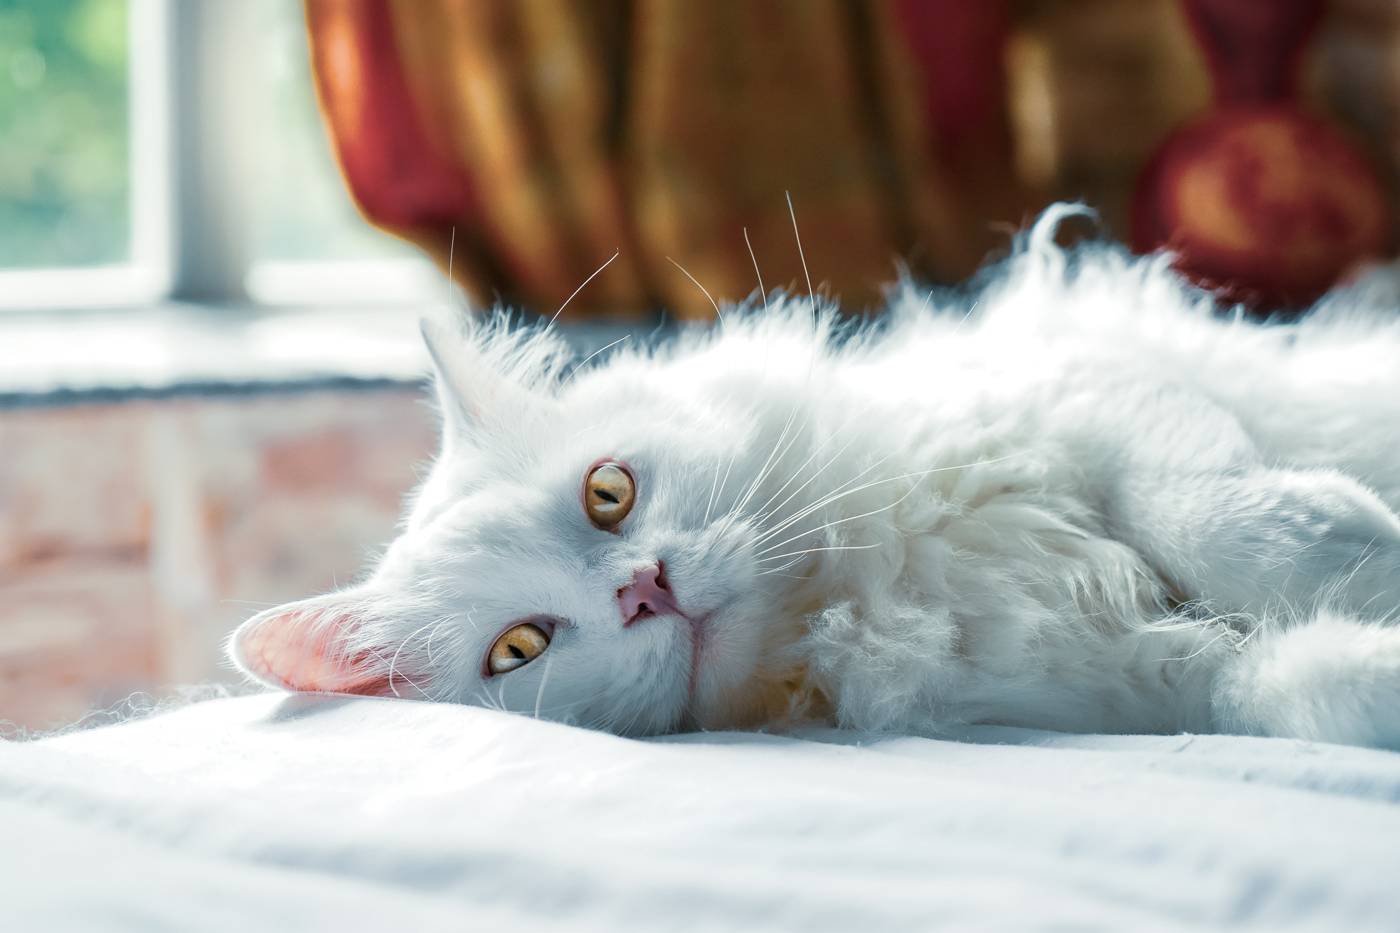 A fluffy white cat relaxing on a bed